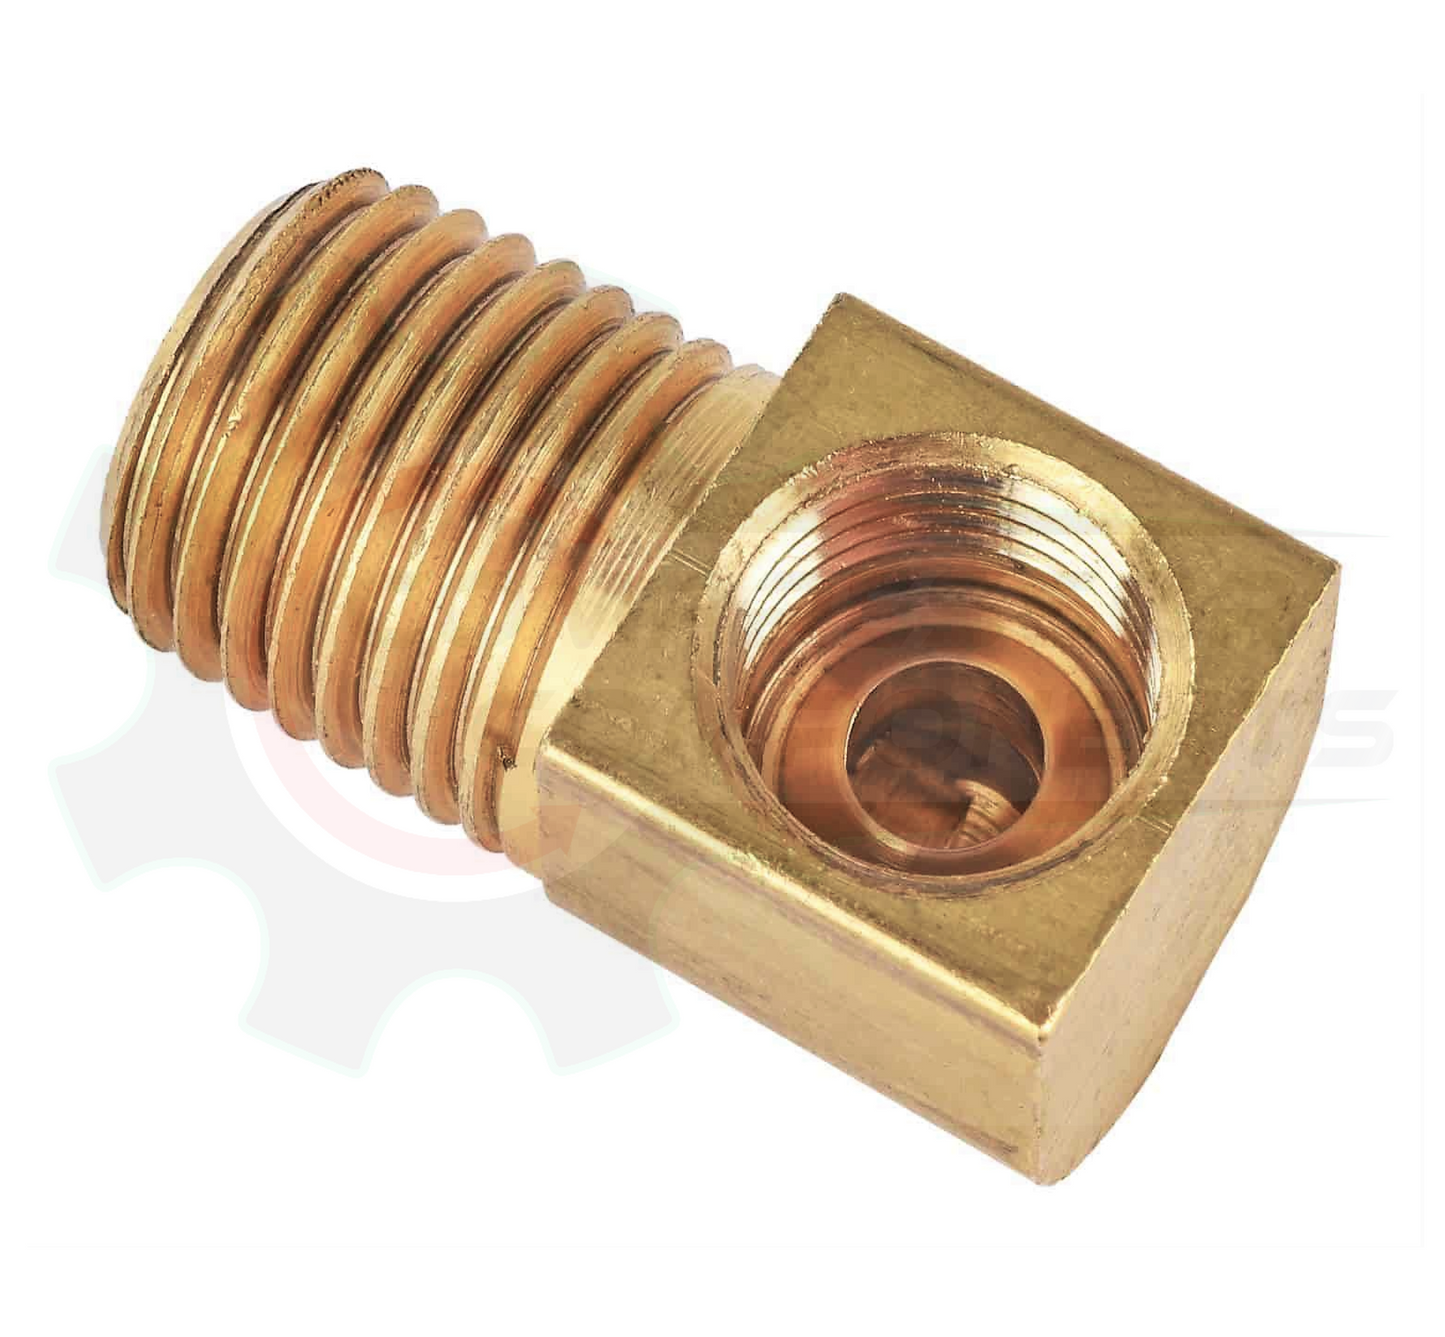 BRASS 5/16" INVERTED FLARE 90 DEGREE ELBOW X 1/4" MNPT ADAPTER